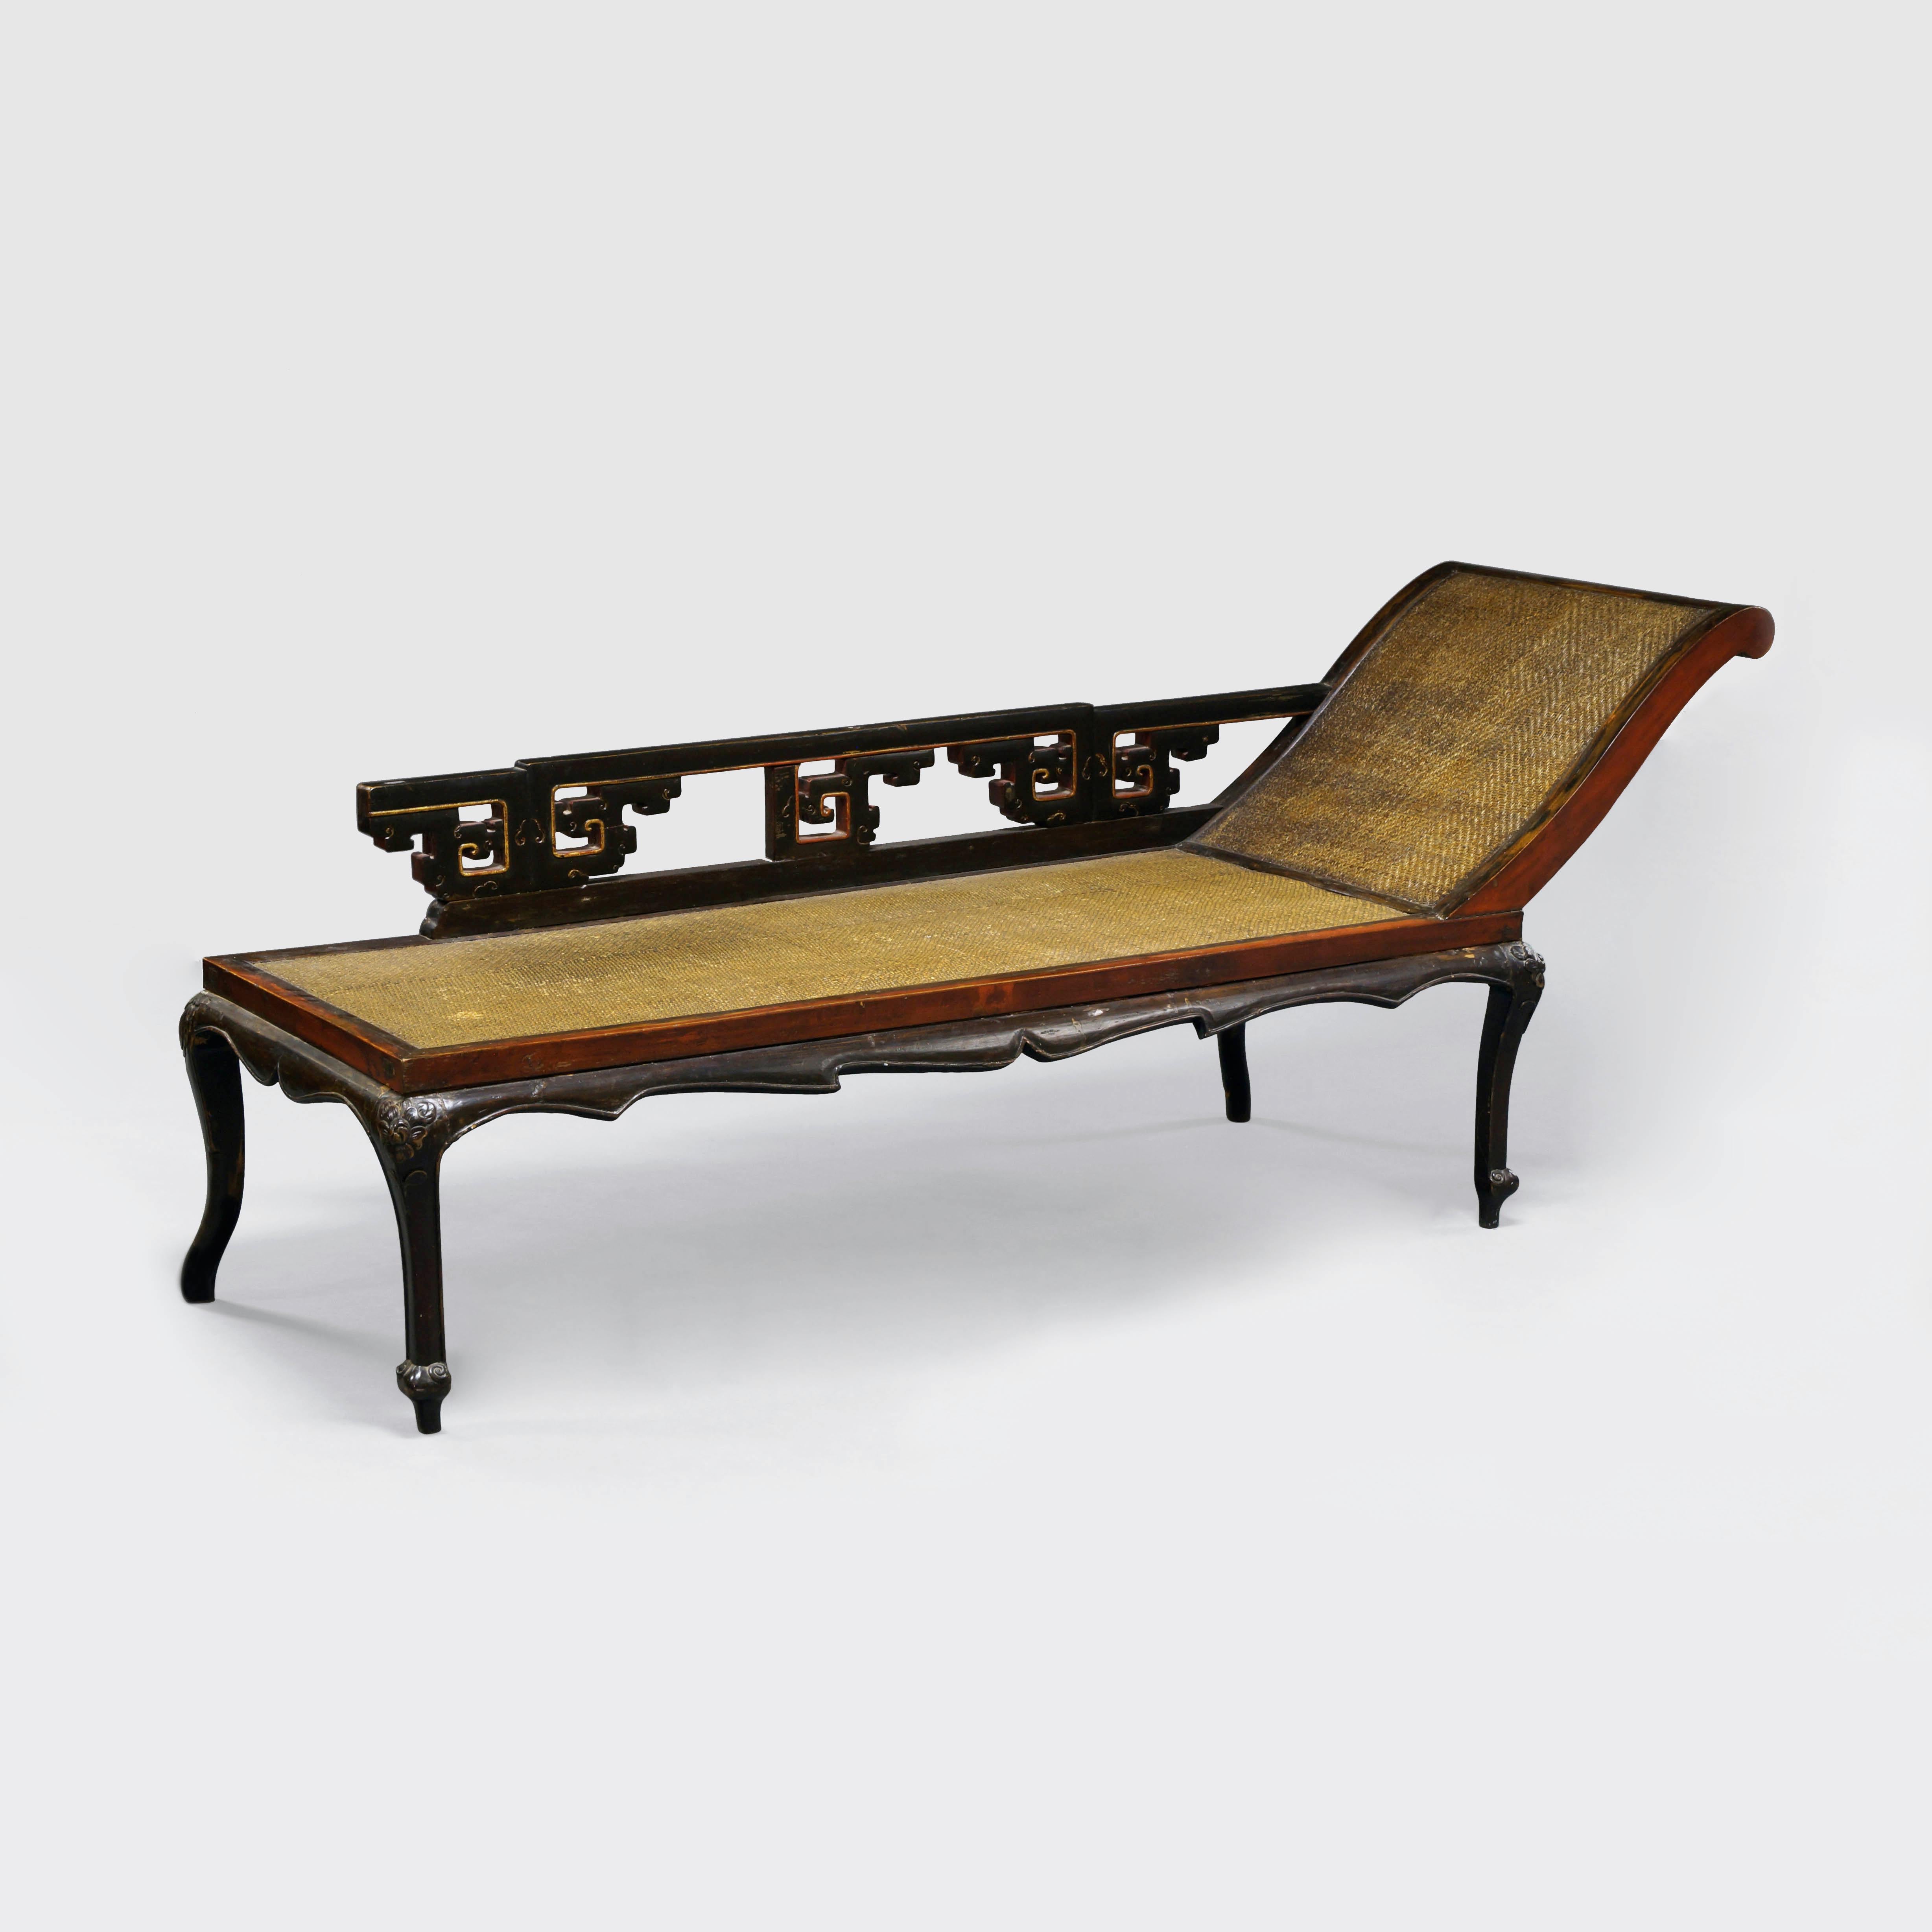 Early 20th century Chinese daybed with soft cane top epitomises the elegance of Jiangsu furniture, which was highly rated in ancient China. Elegantly proportioned, it has rounded corners with archaic motifs to back on cabriole legs.